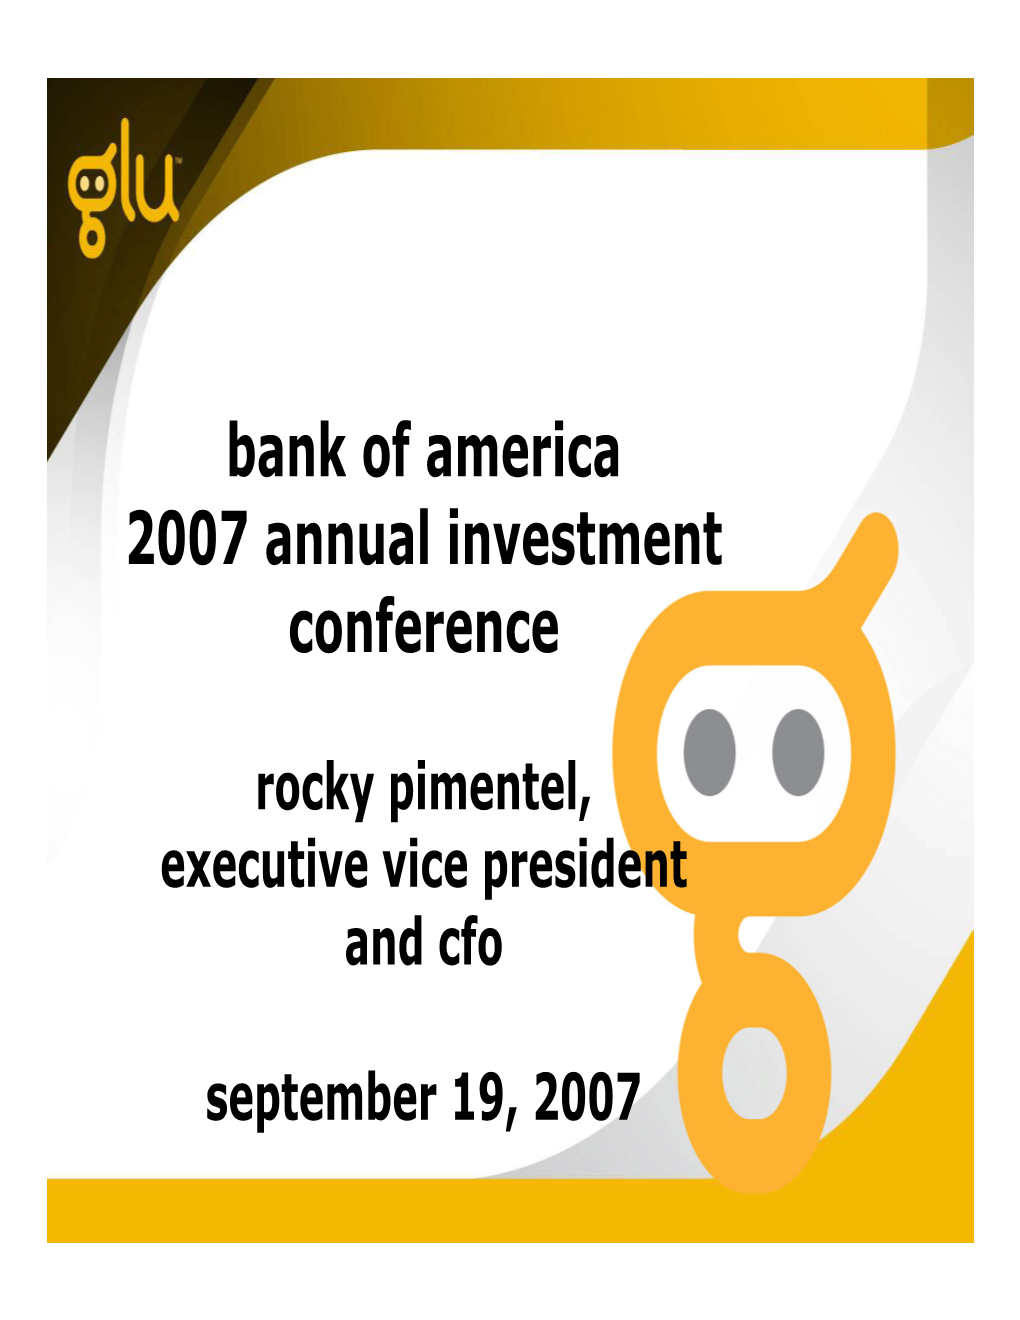 Bank of America 2007 Annual Investment Conference